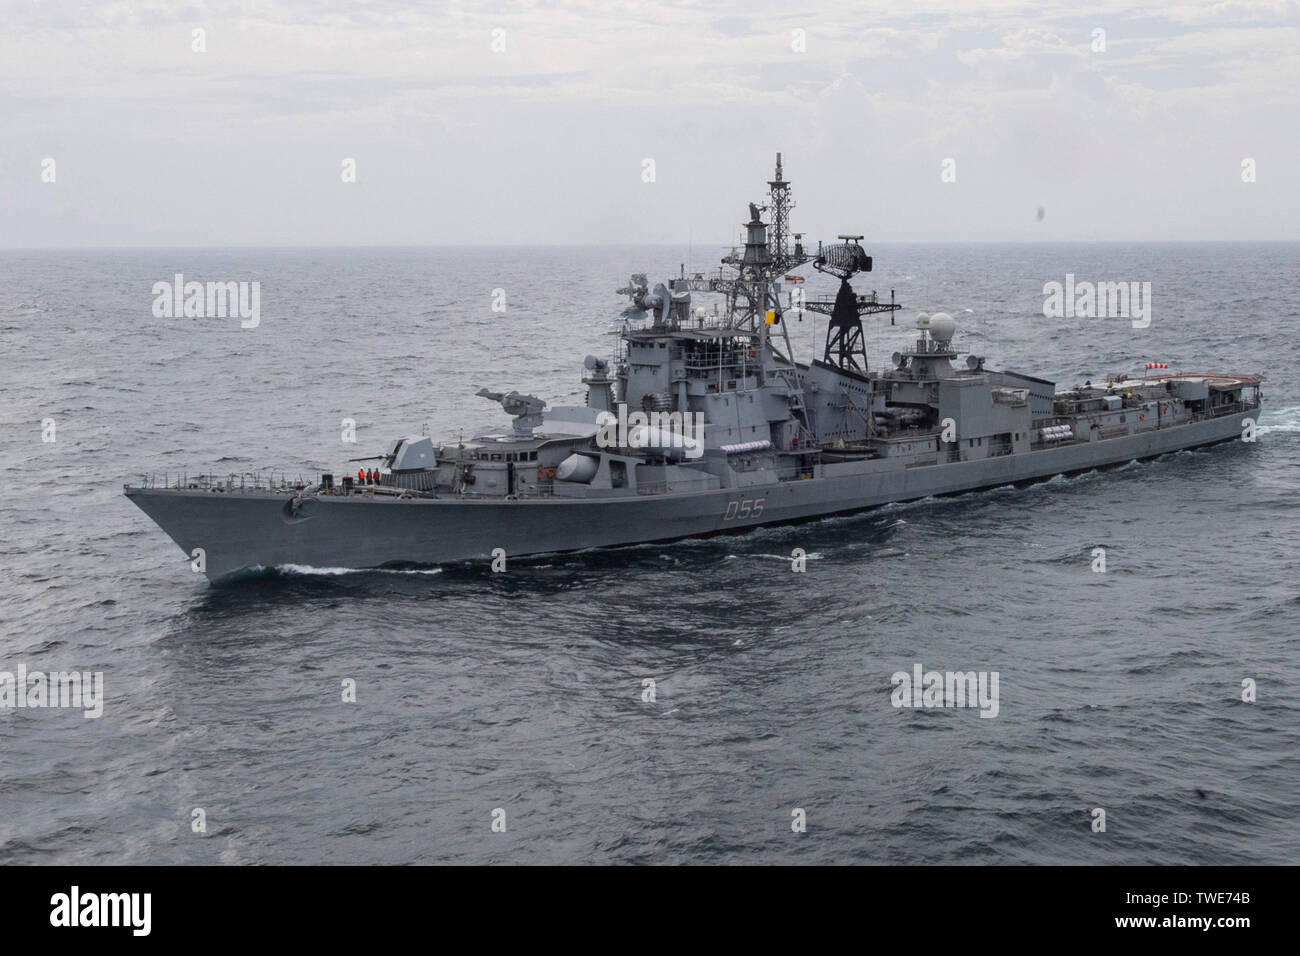 190614-N-NB544-1684 INDIAN OCEAN (June 14, 2019) The Indian navy Rajput-class destroyer INS Ranvijay (D55) steams behind the the San Antonio-class amphibious transport dock ship USS John P. Murtha (LPD 26) during a photographic exercise. John P. Murtha is currently on its first deployment and part of the Boxer Amphibious Ready Group (ARG) and the 11th Marine Expeditionary Unit (MEU) team and is deployed to the 7th Fleet area of operation to support regional stability, reassure partners and allies, and maintain a presence postured to respond to any crisis ranging from humanitarian assistance to Stock Photo